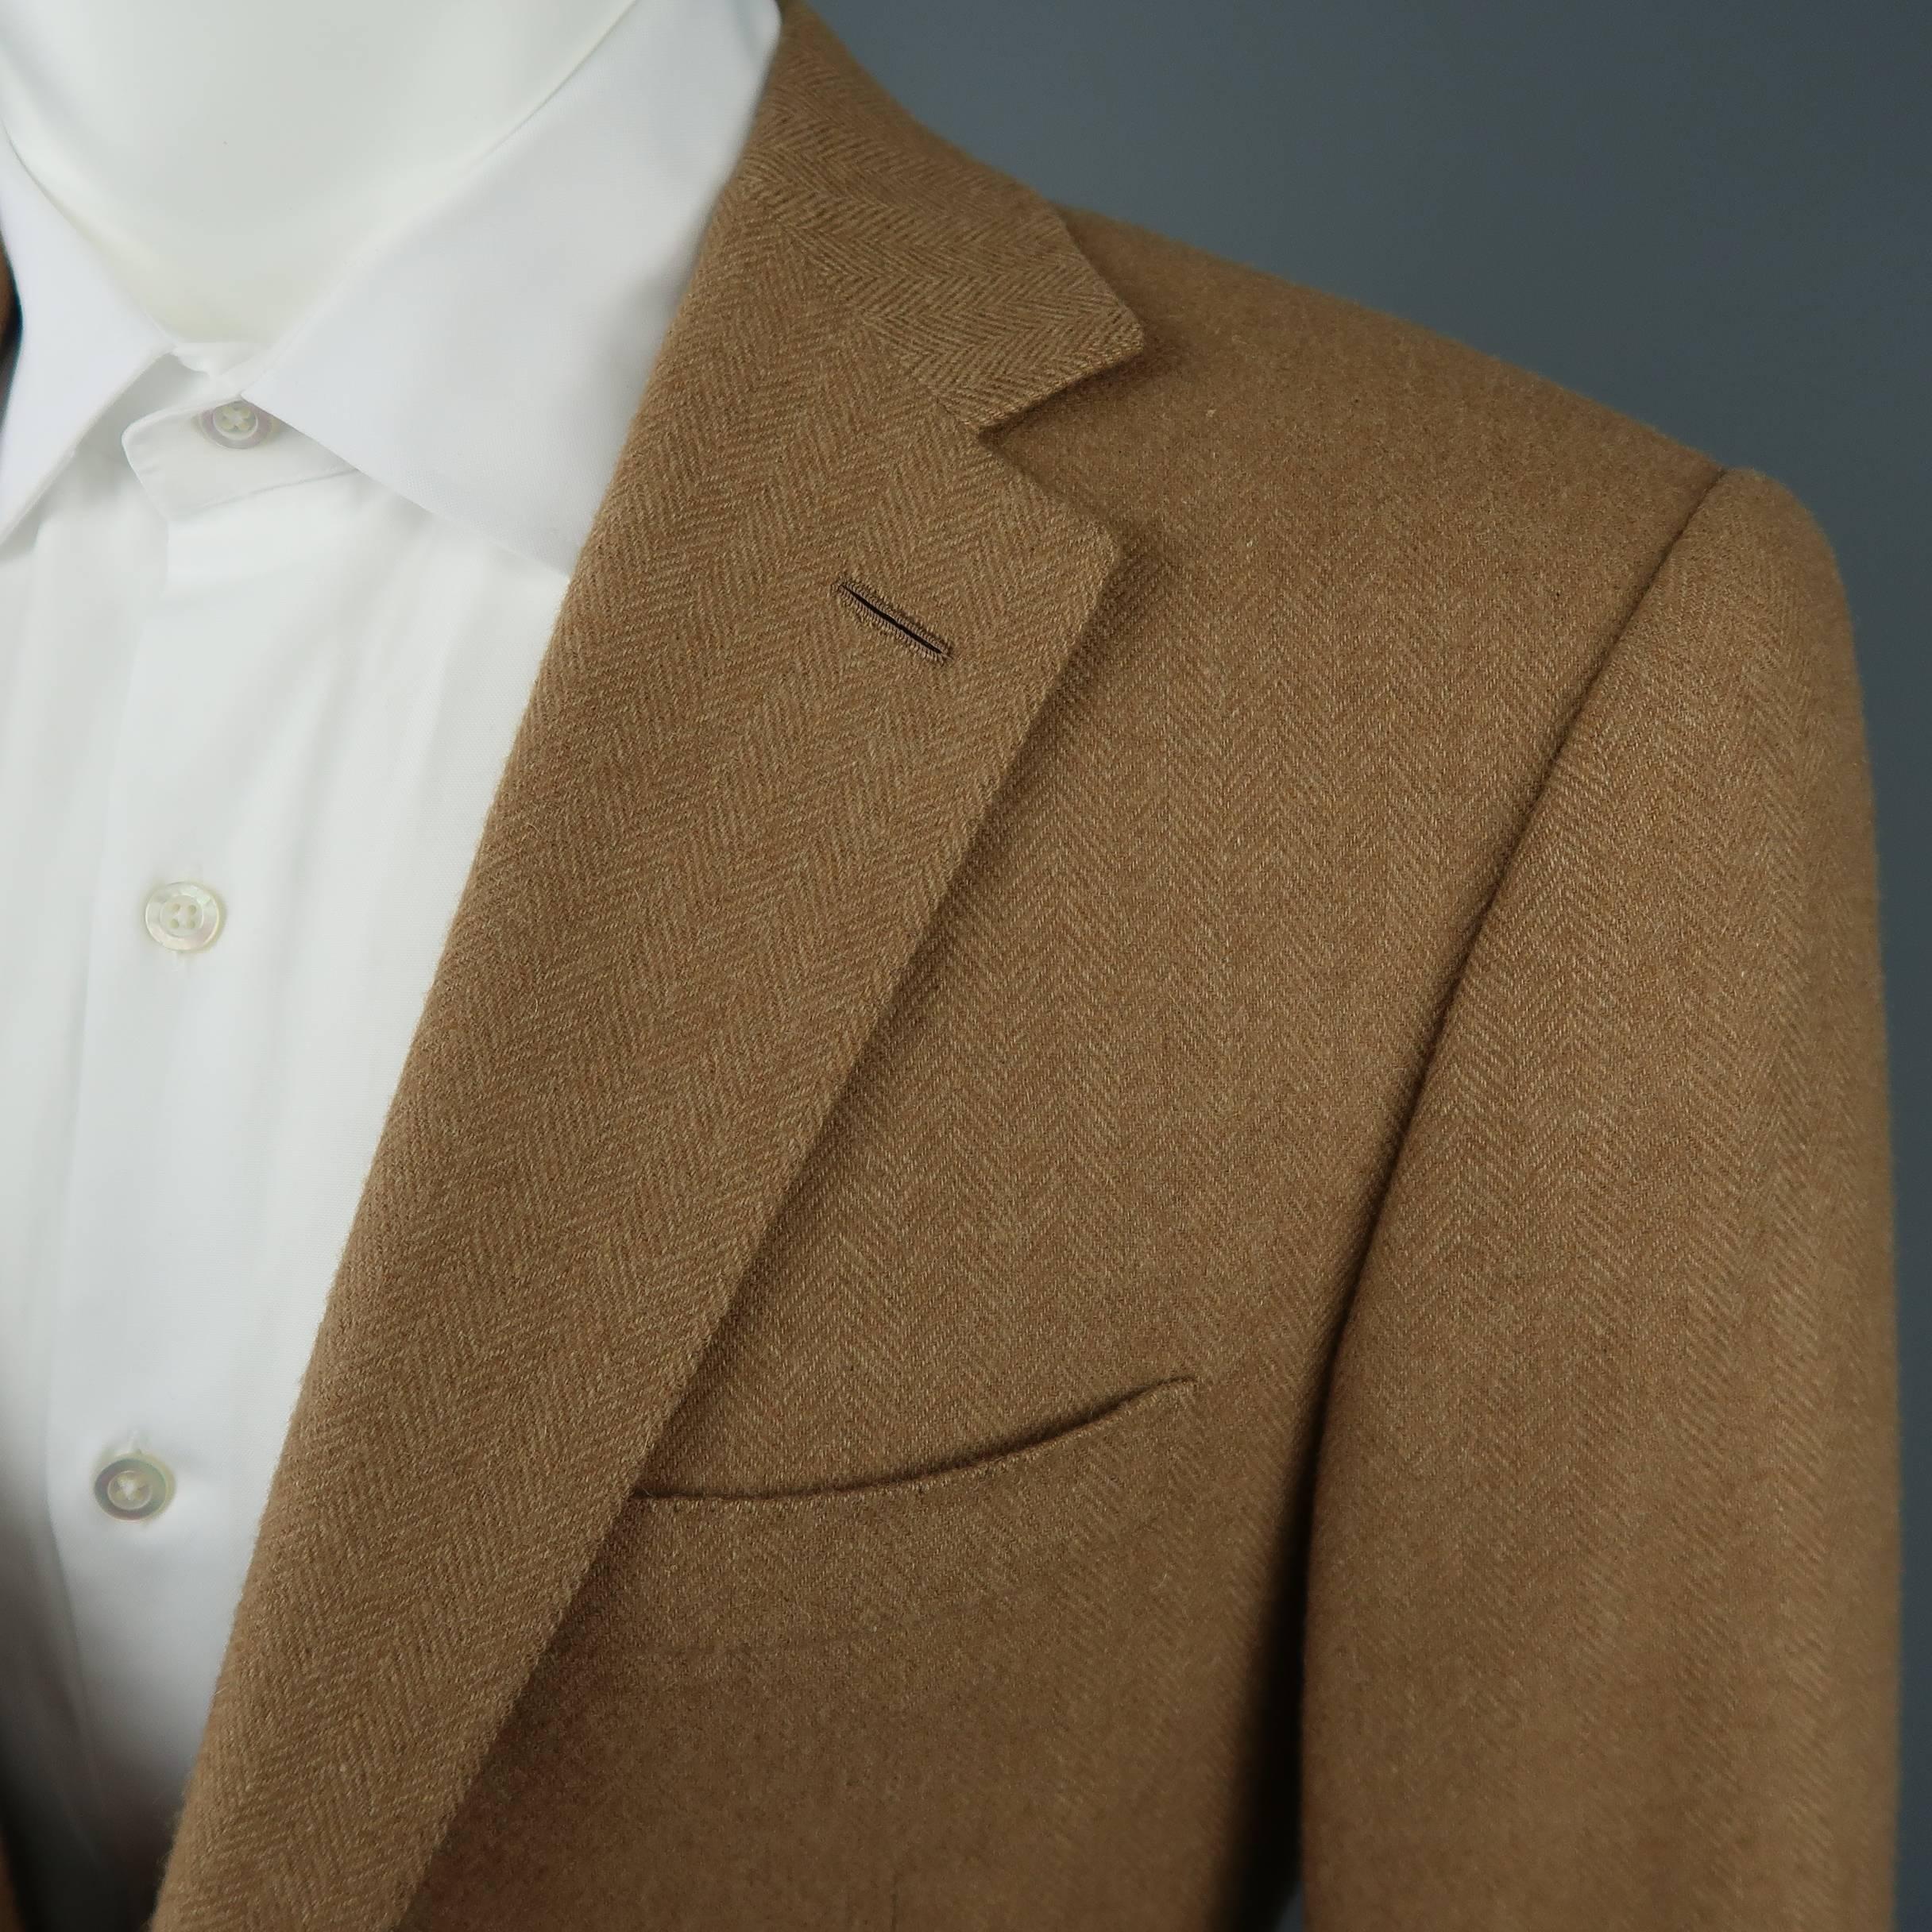 Ralph Lauren Purple Label sport coat comes in tan herringbone cashmere with a notch lapel, two button front, triple flap pockets, and double vented back. Made in Italy.
 
Excellent Pre-Owned Condition.
Marked: 40
 
Measurements:
 
Shoulder: 18.5